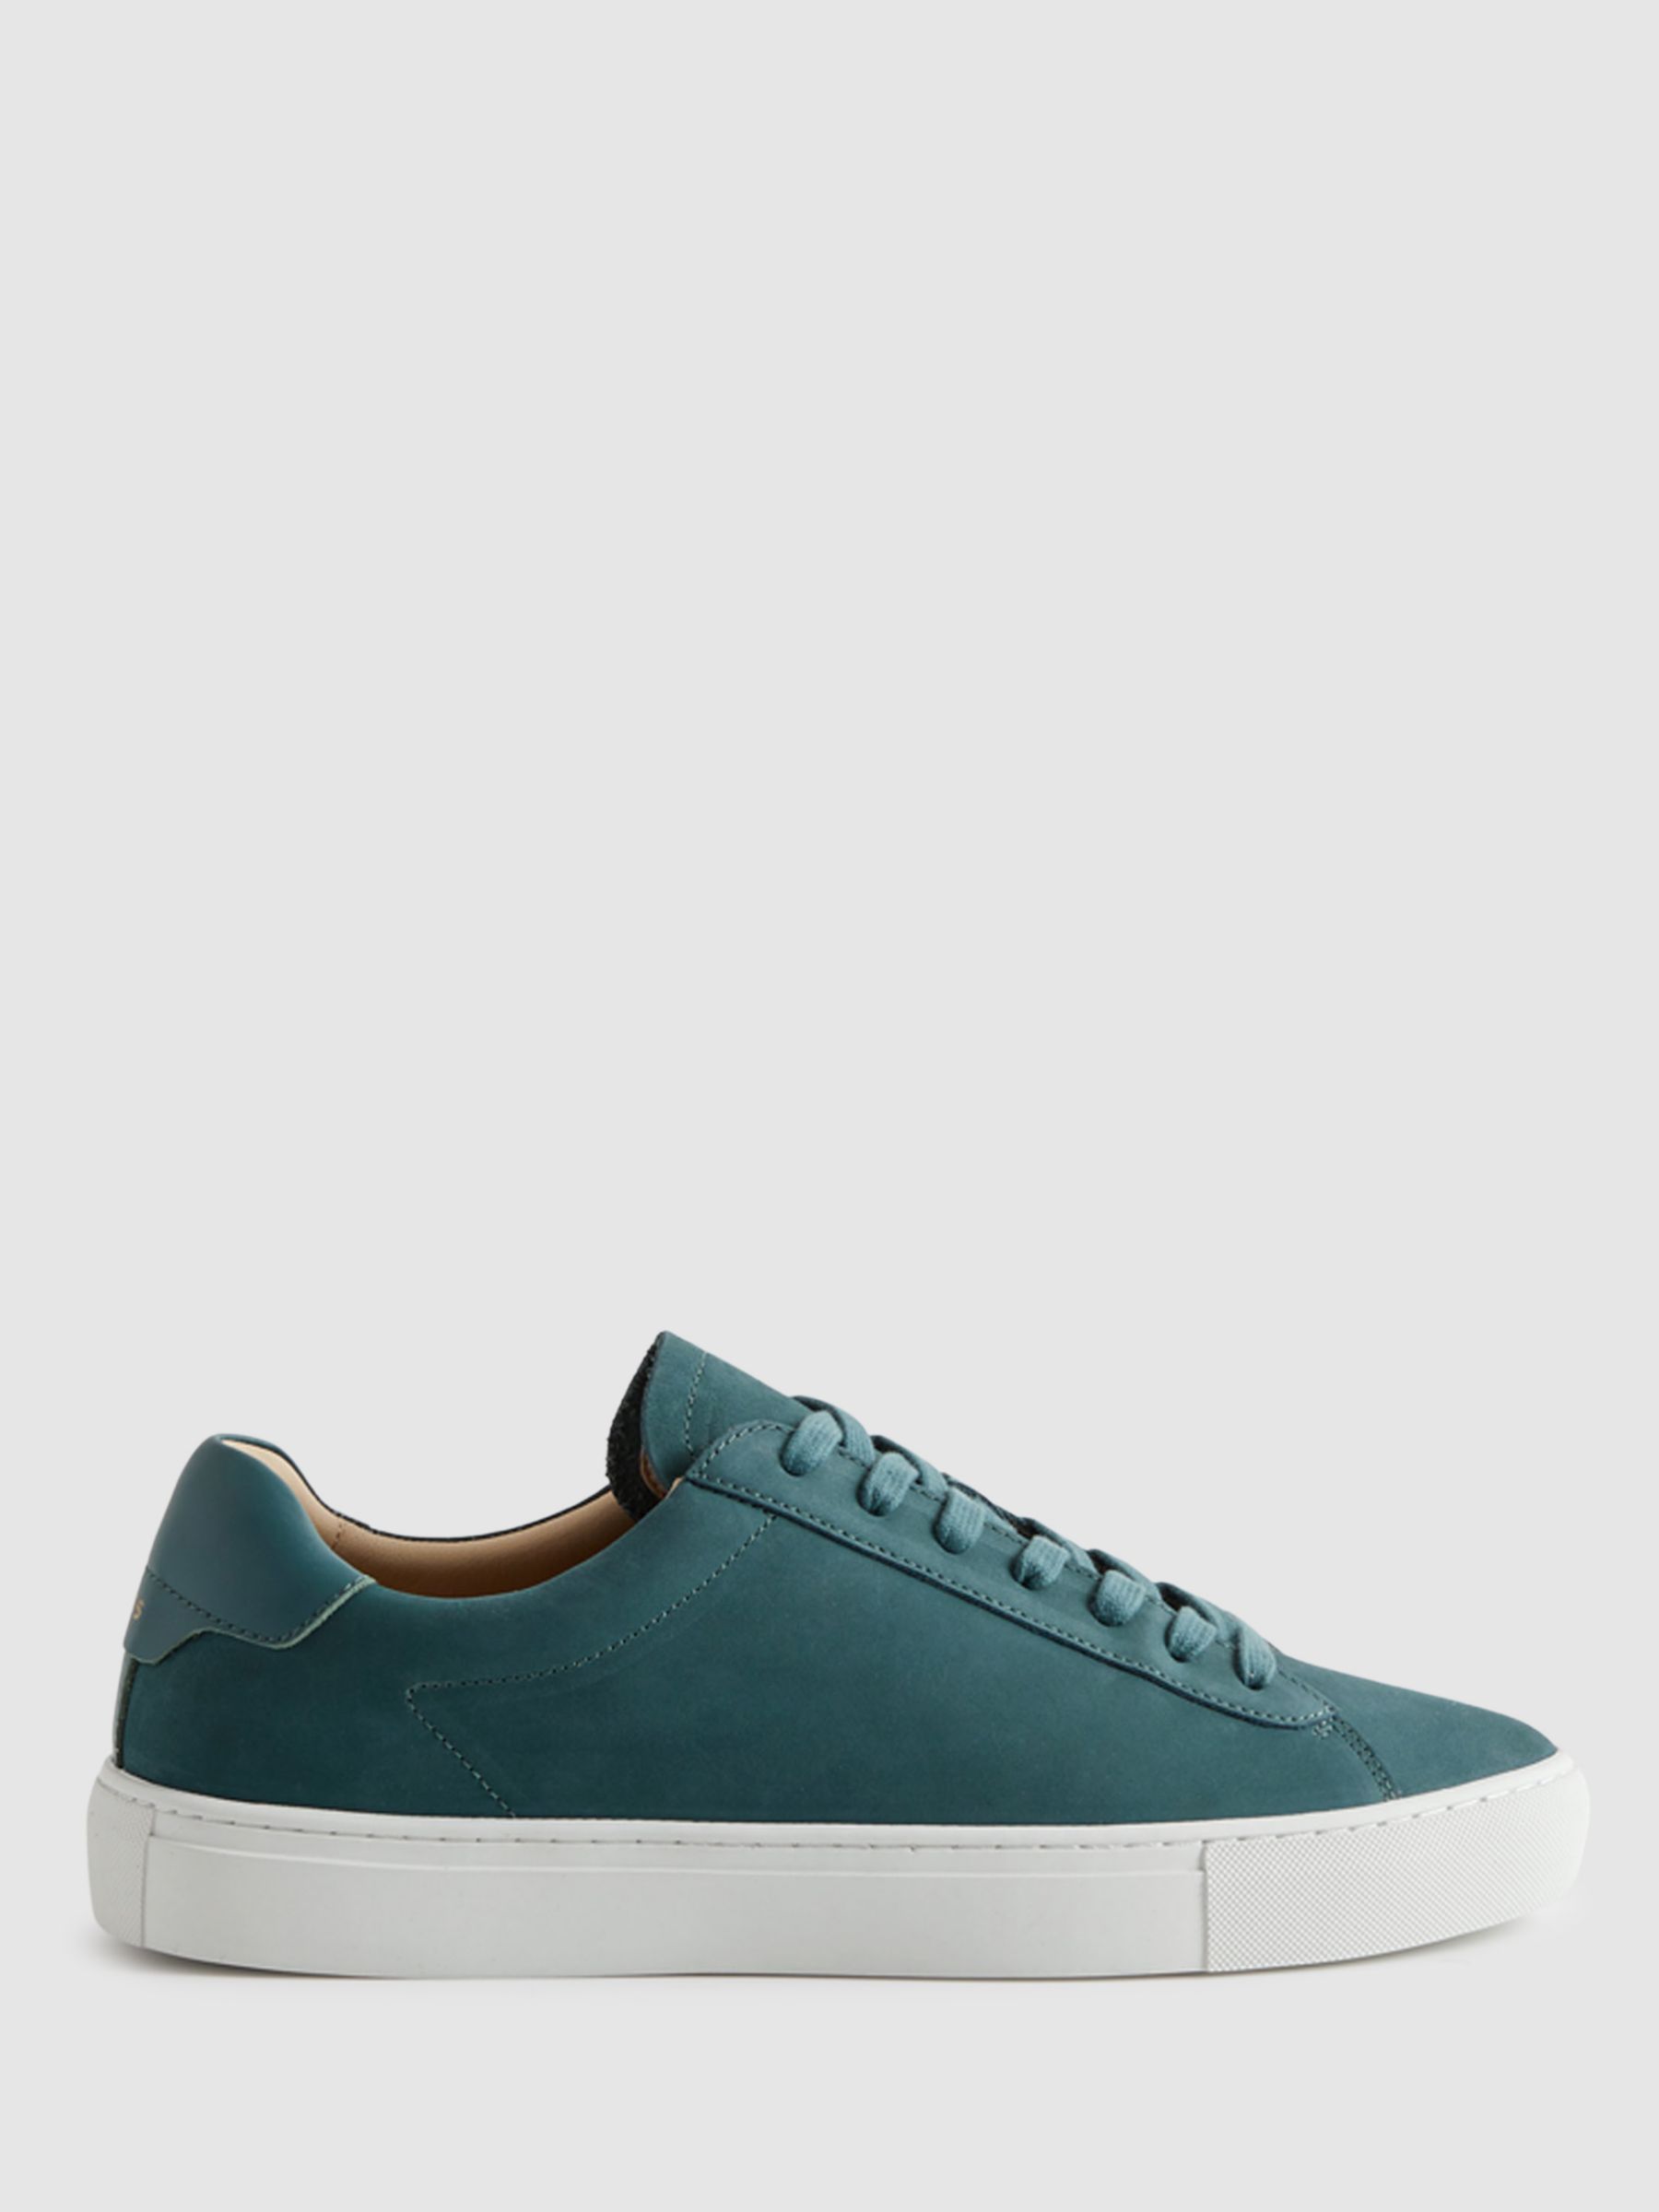 Reiss Finley Leather Trainers, Seafoam at John Lewis & Partners